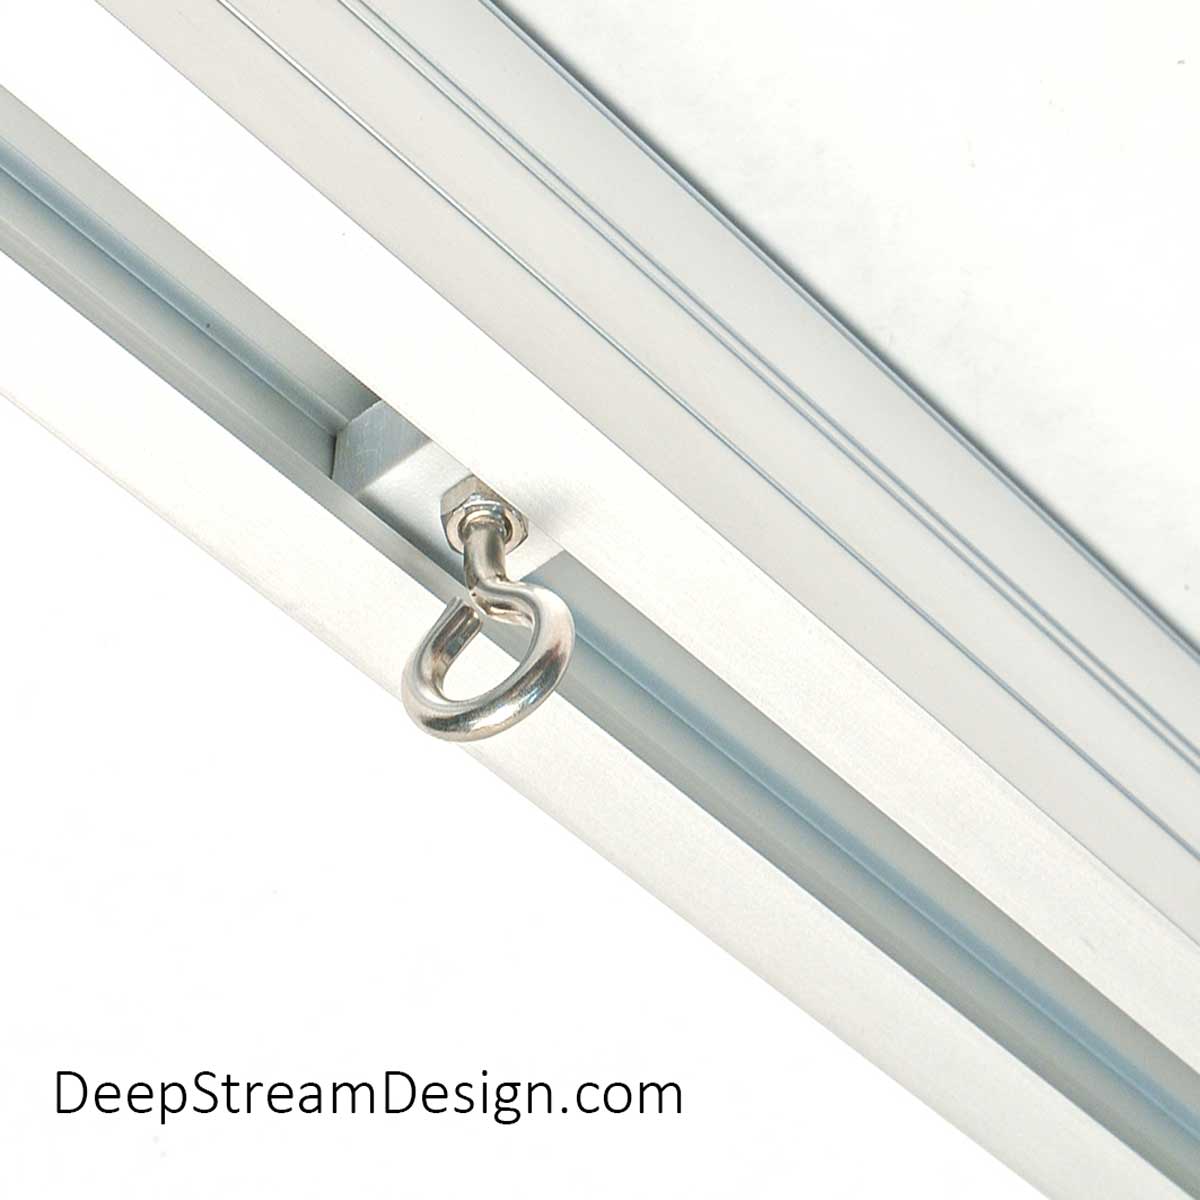 A studio photo shows how a slippery HDPE plastic block with a 316-stainless steel mini eyebolt makes the perfect track slide for curtains when uses used inside the flawless anodized panel acceptance slot designed into all the Audubon Structural Architectural Aluminum Frame System primary extrusions.